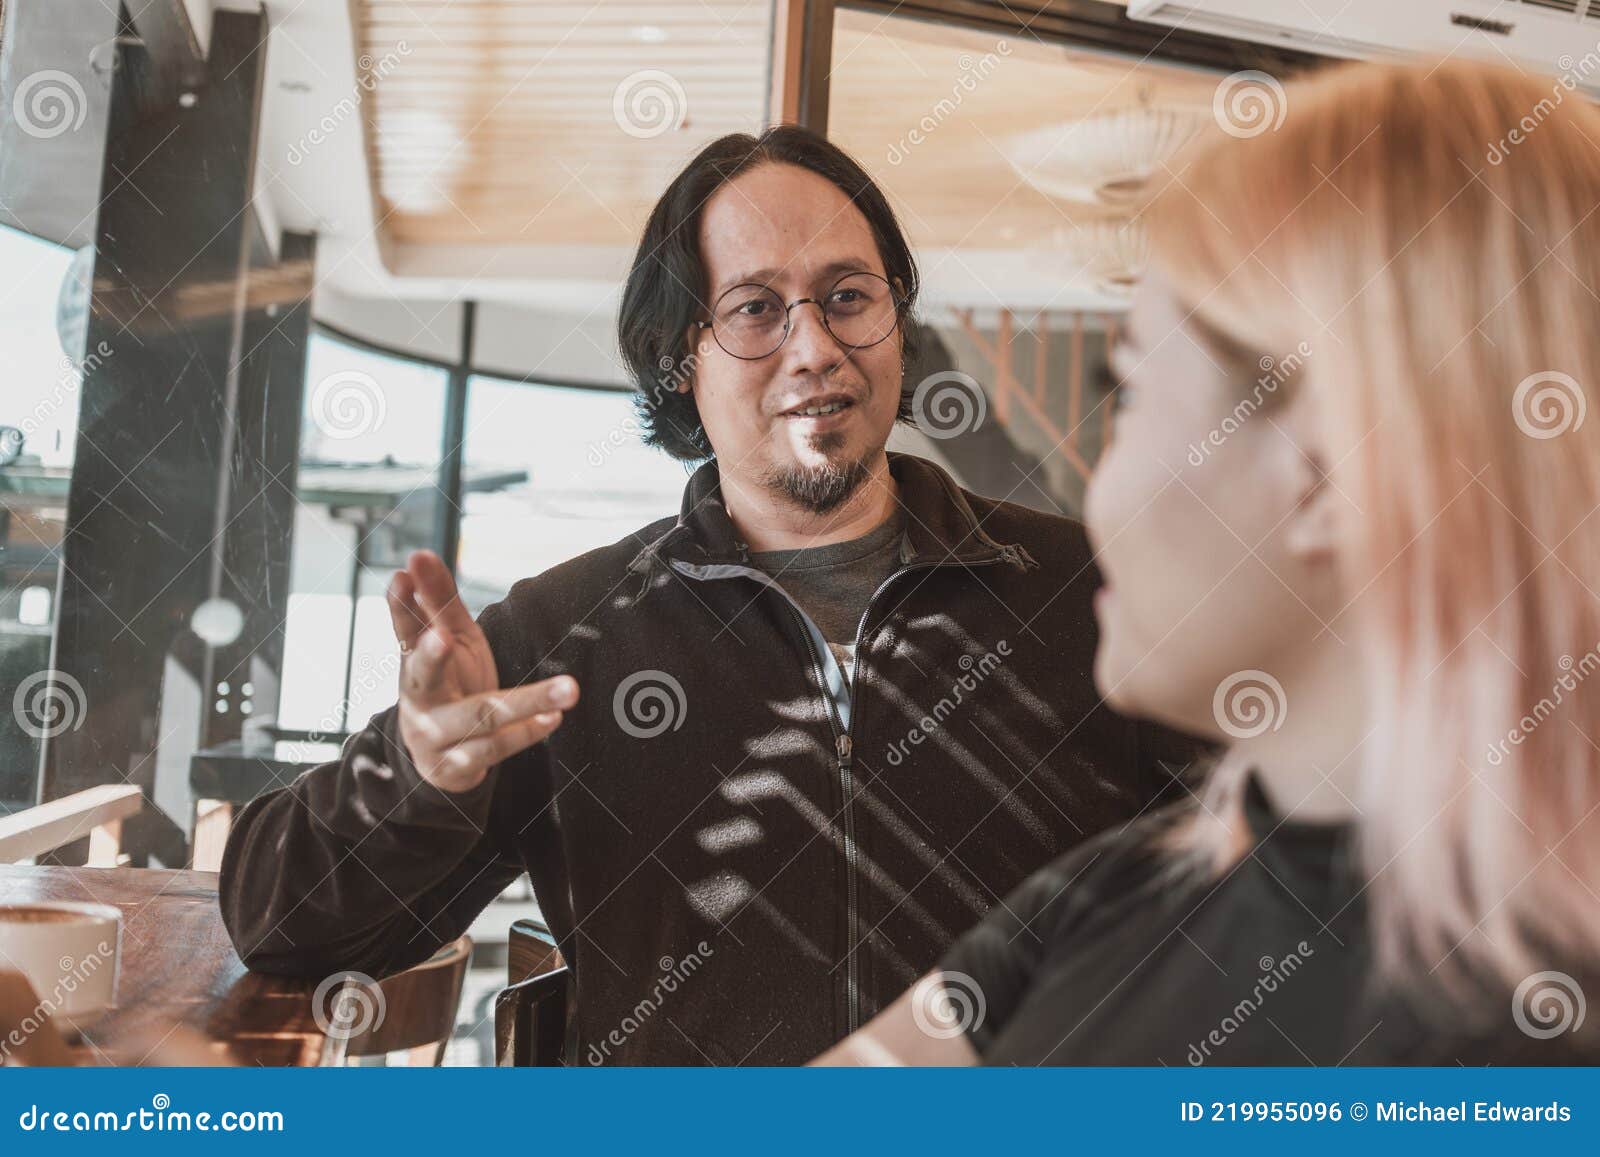 an asian mentor or supervisor instructs and teaches a younger asian woman protege. casual discussion at a coworking space